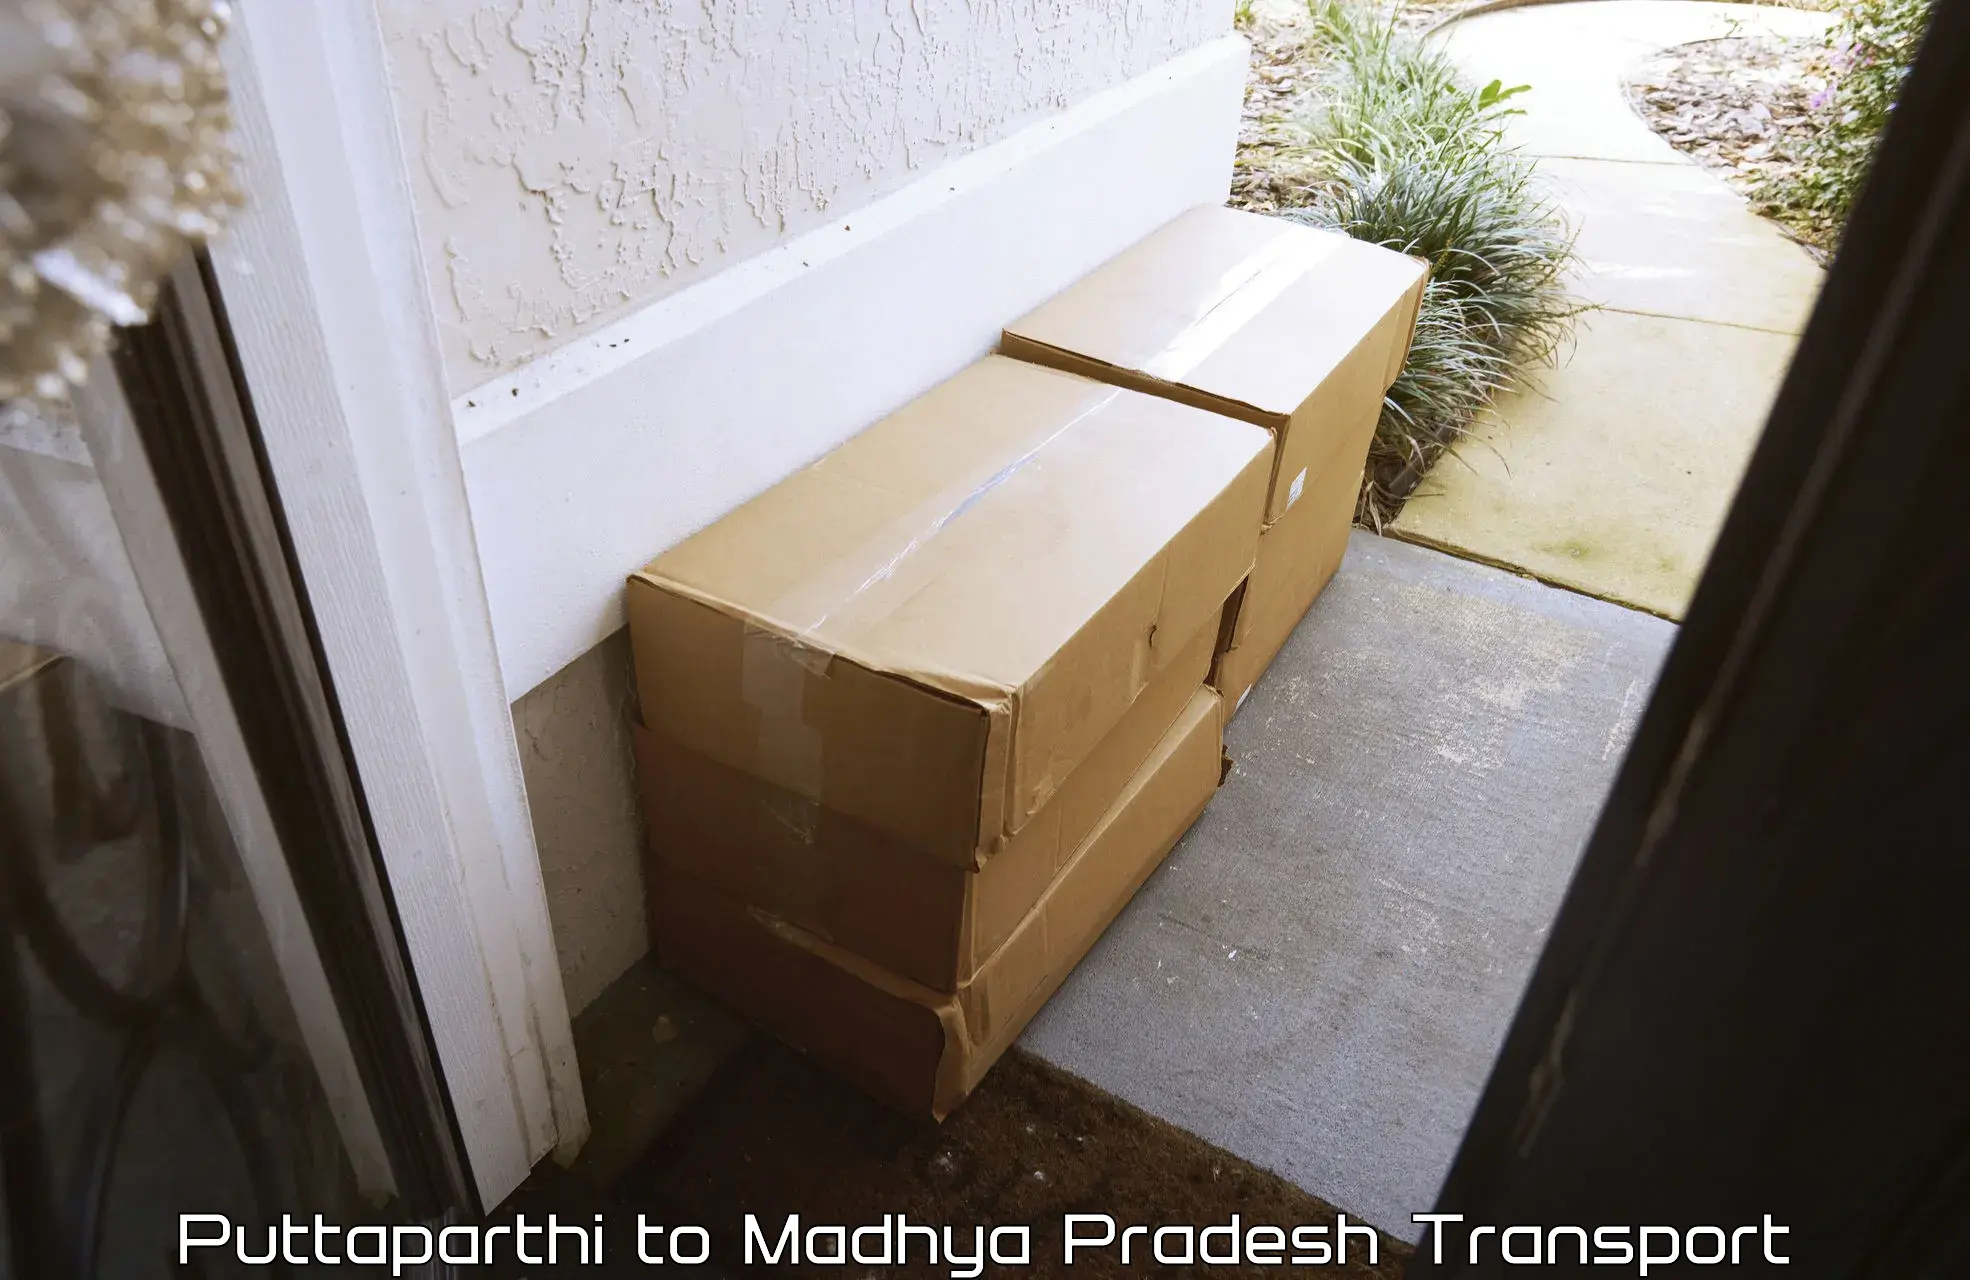 Shipping partner in Puttaparthi to IIIT Bhopal